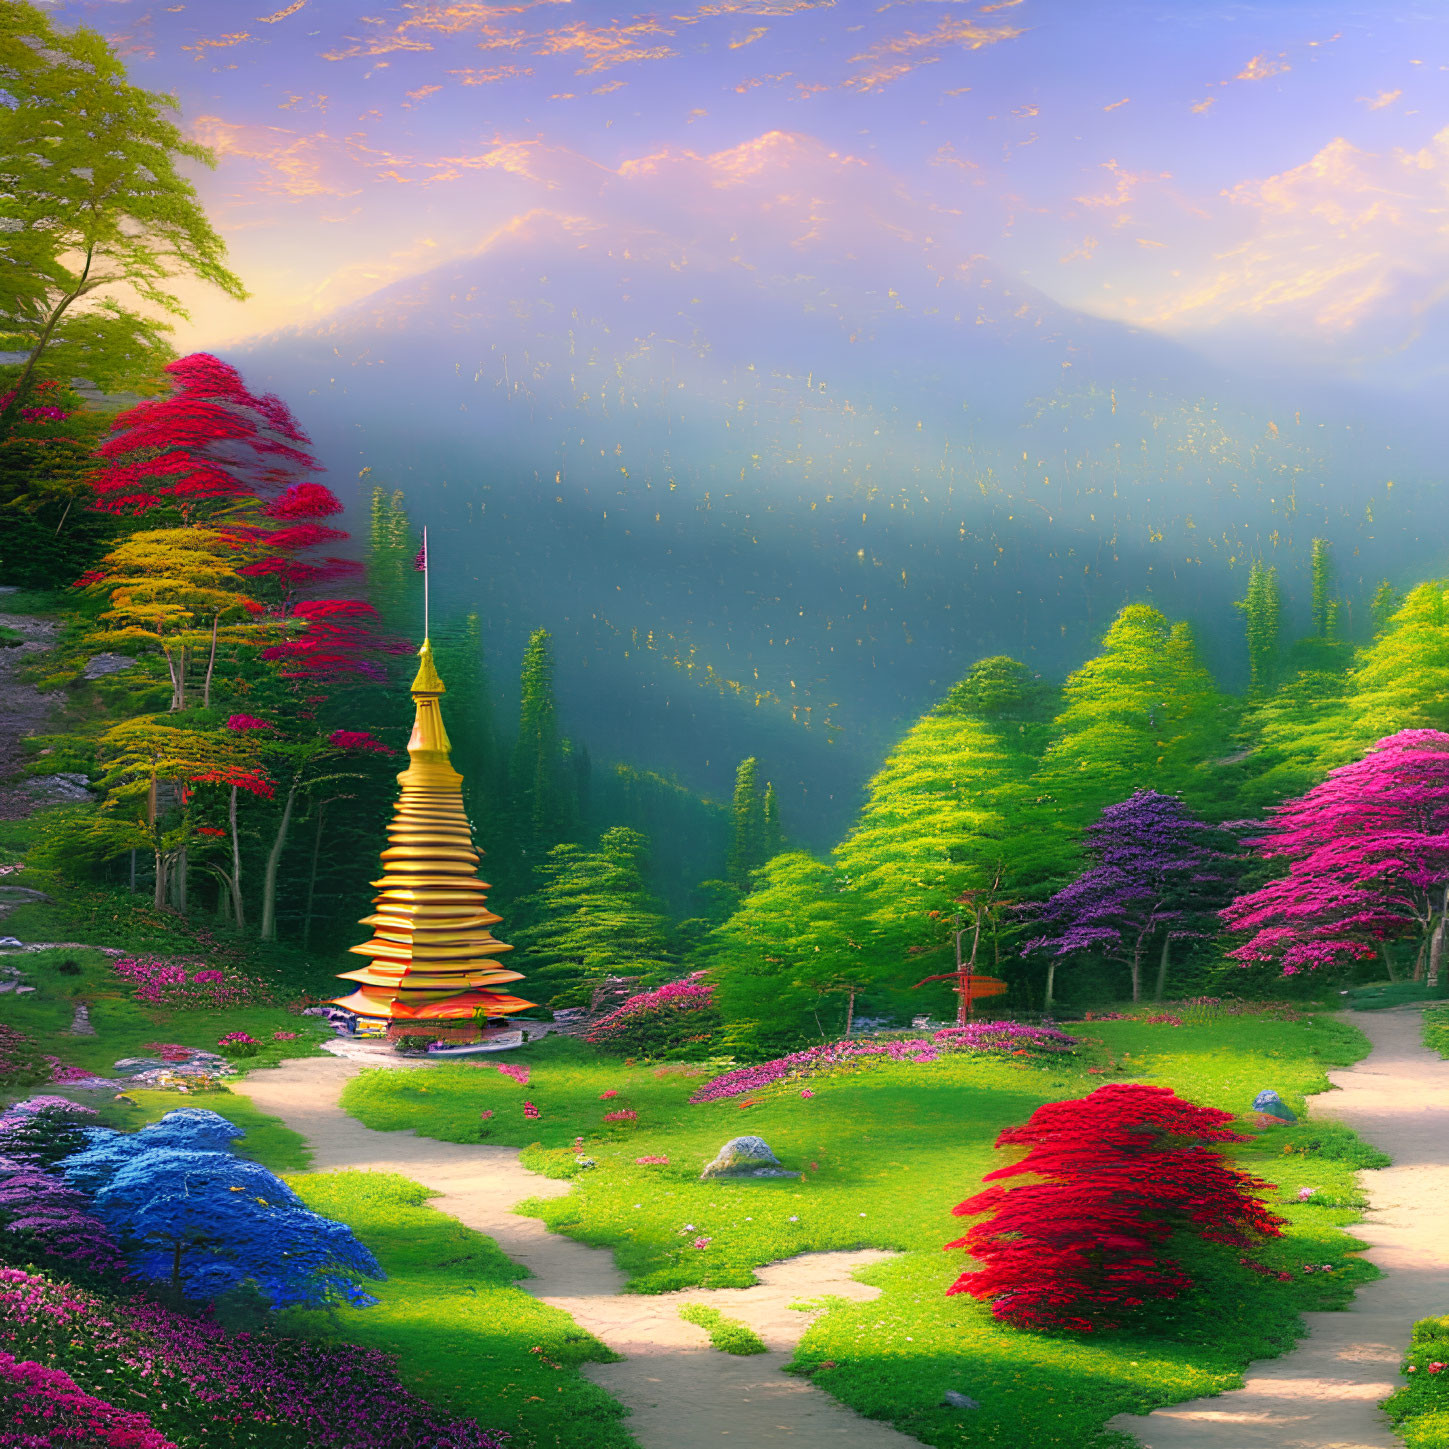 Digital artwork: Enchanting forest with pagoda, colorful trees, flowers, winding path